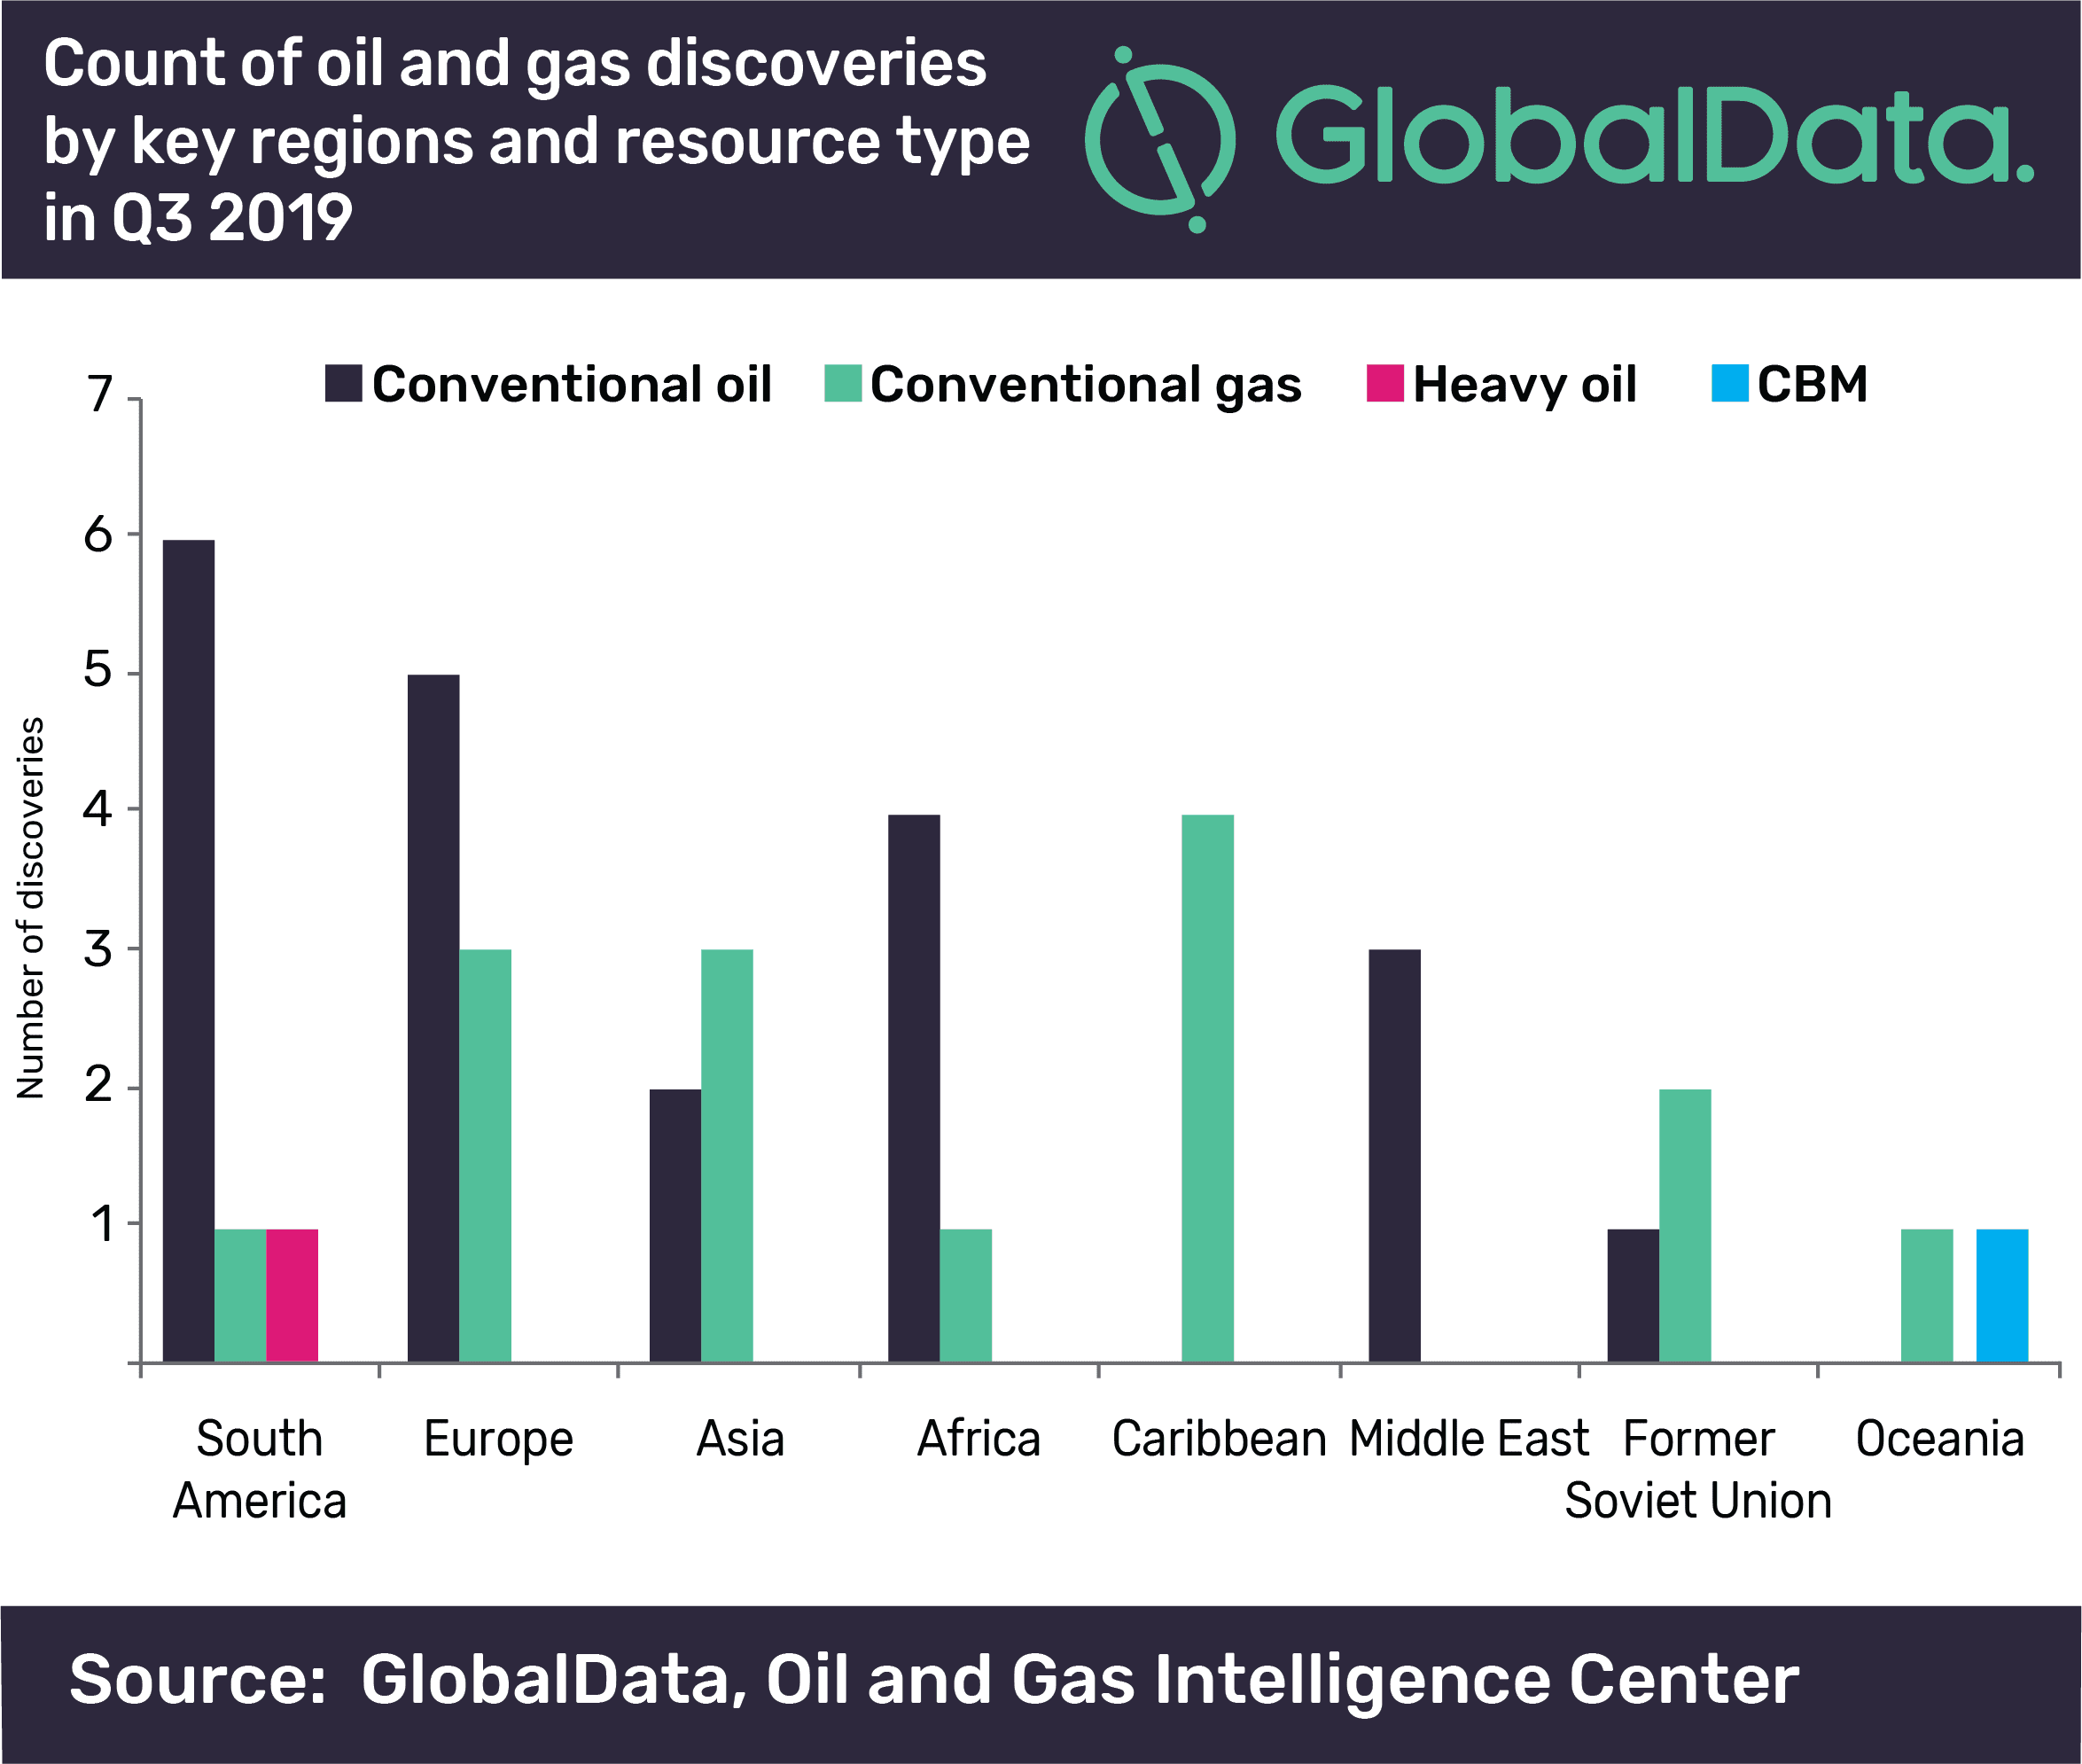 South America and Europe led globally with highest number of oil and gas discoveries in Q3 2019